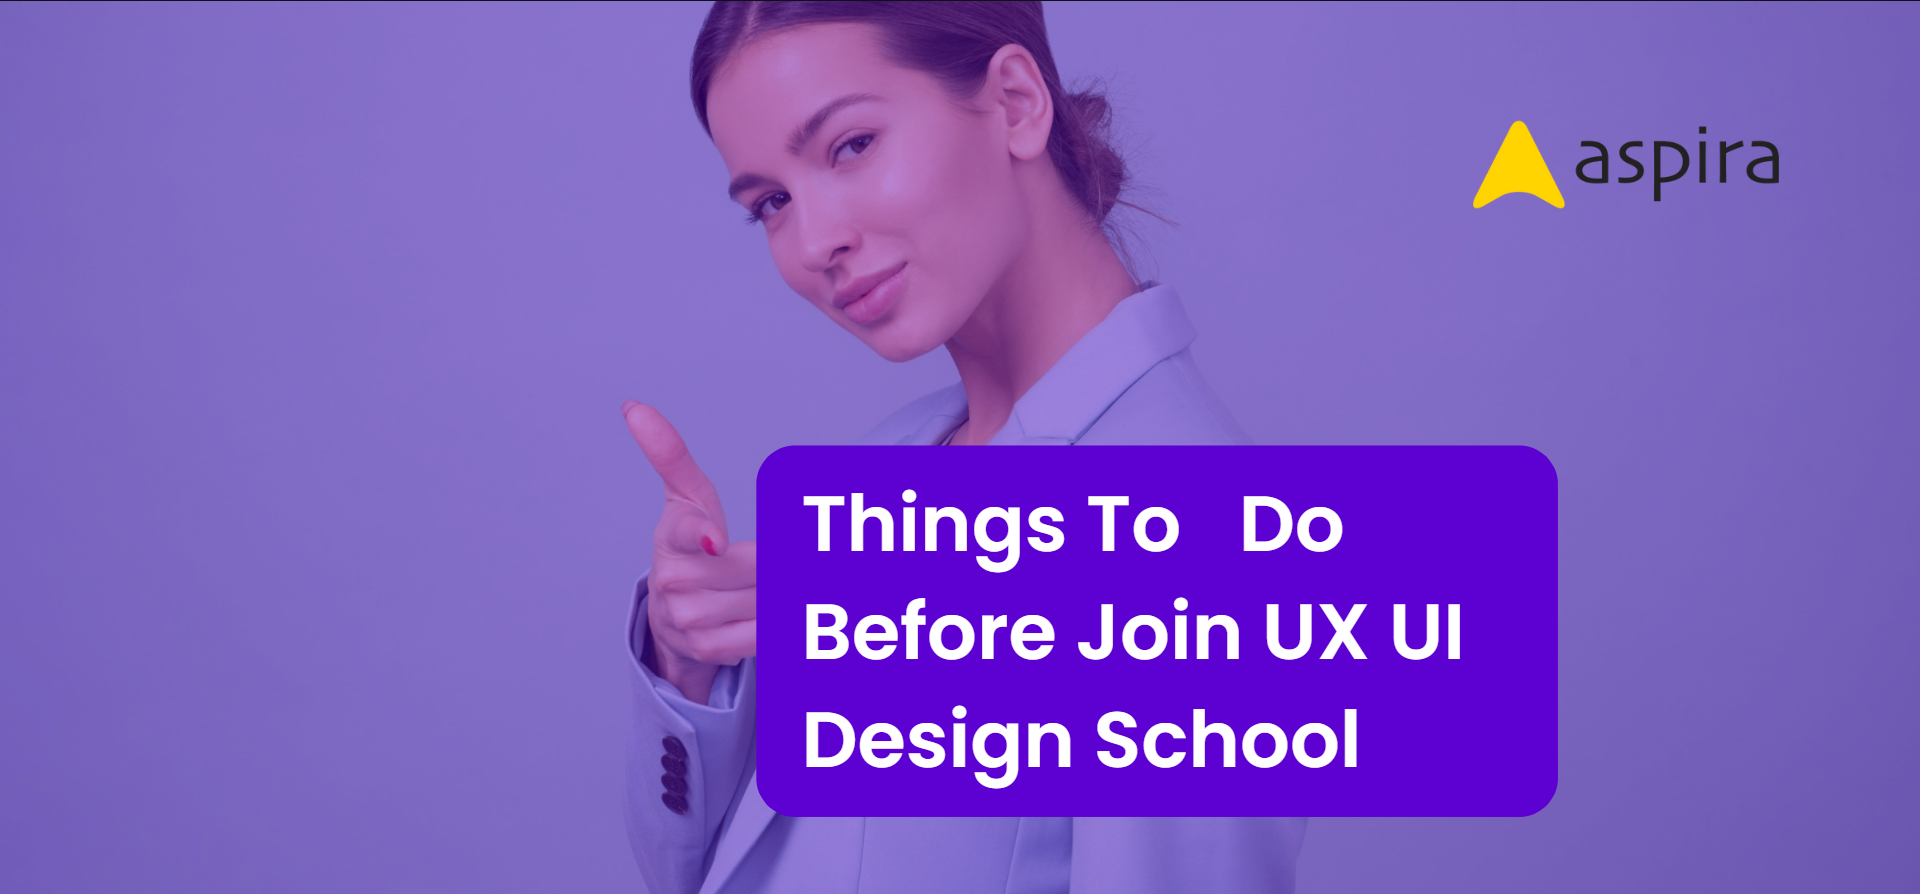 Things to do before join UX UI design school